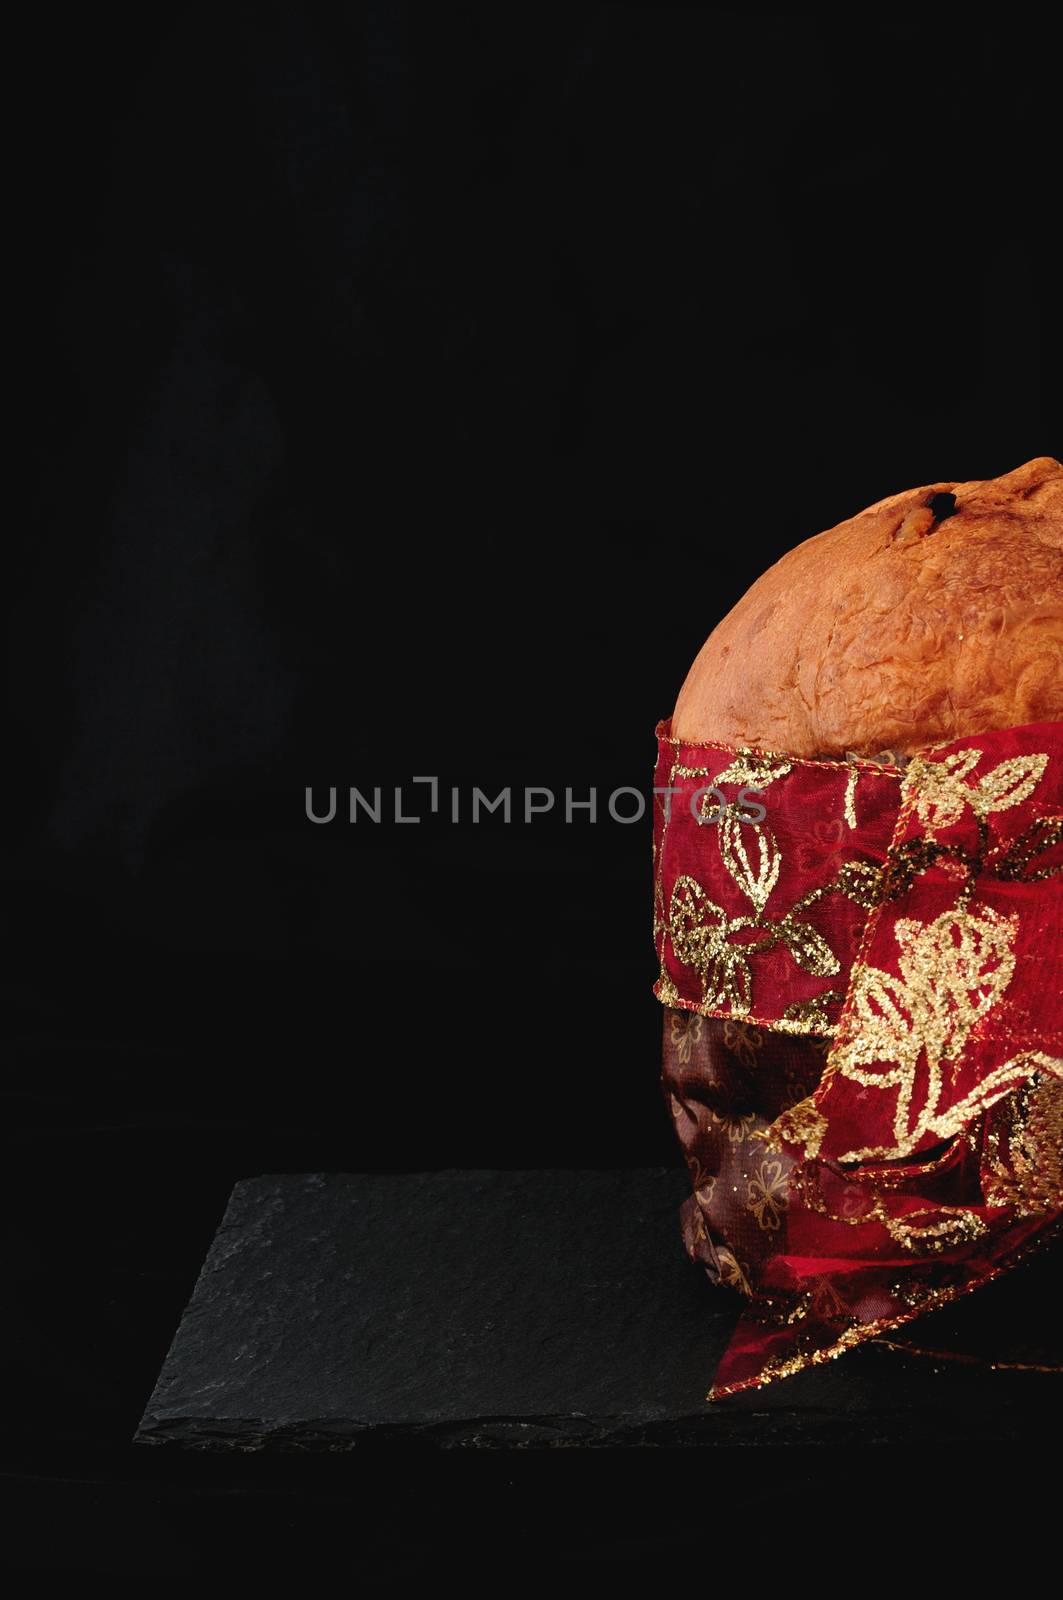 christmas essence, panettone with red ribbon on black background, vertical. Panettone is a typical Christmas cake in Italy